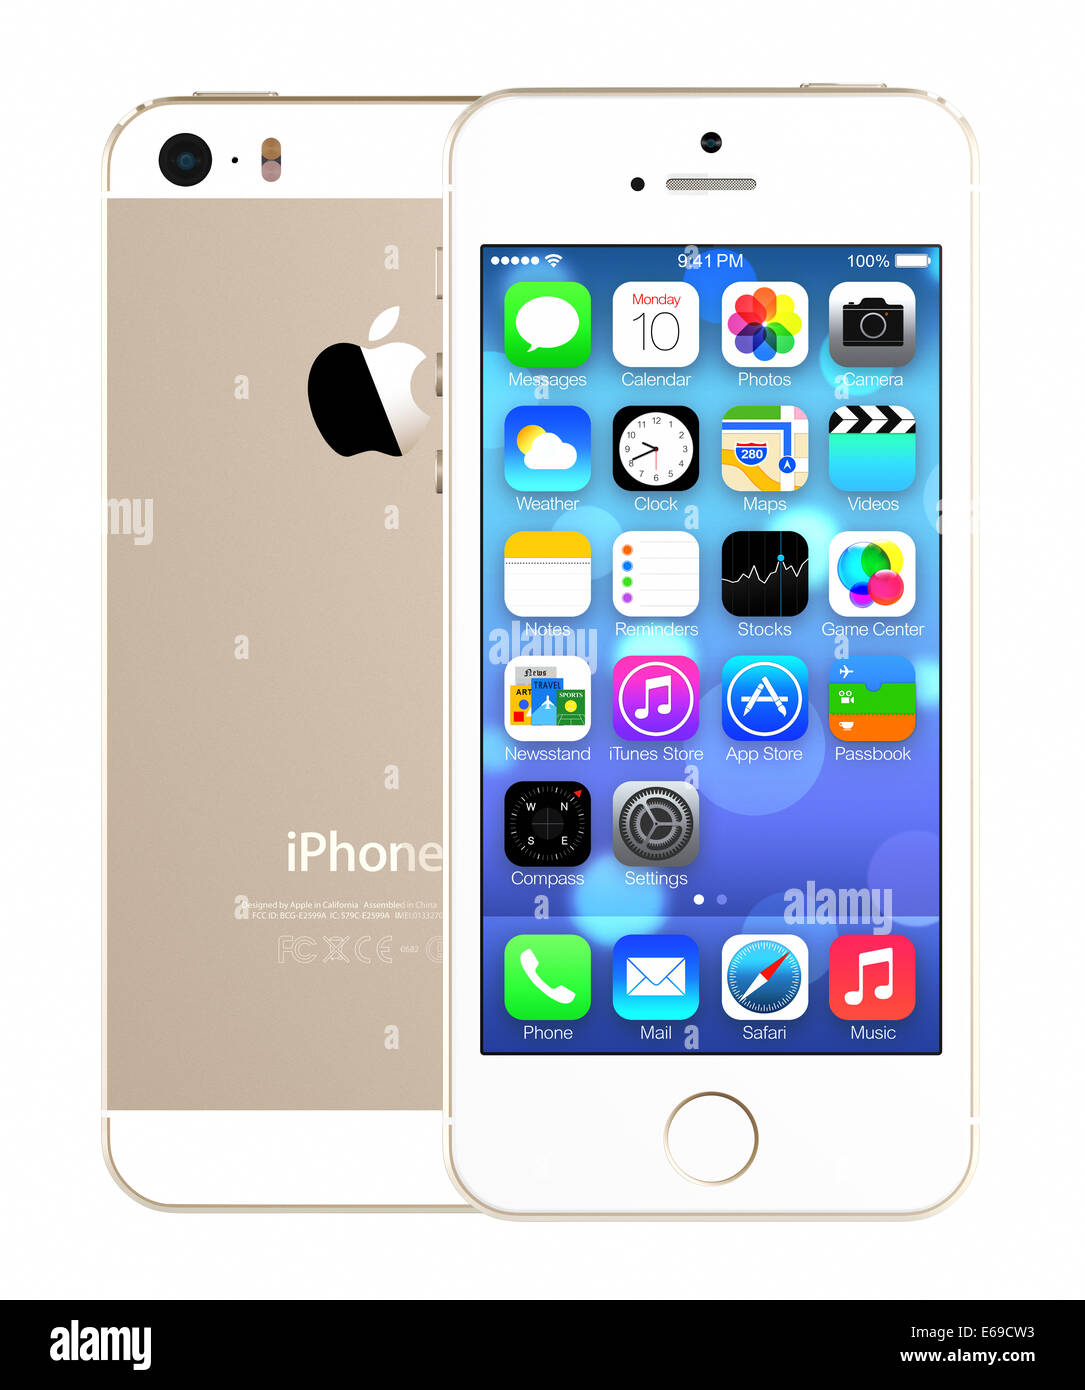 iPhone 5s showing the home screen with iOS7. Stock Photo